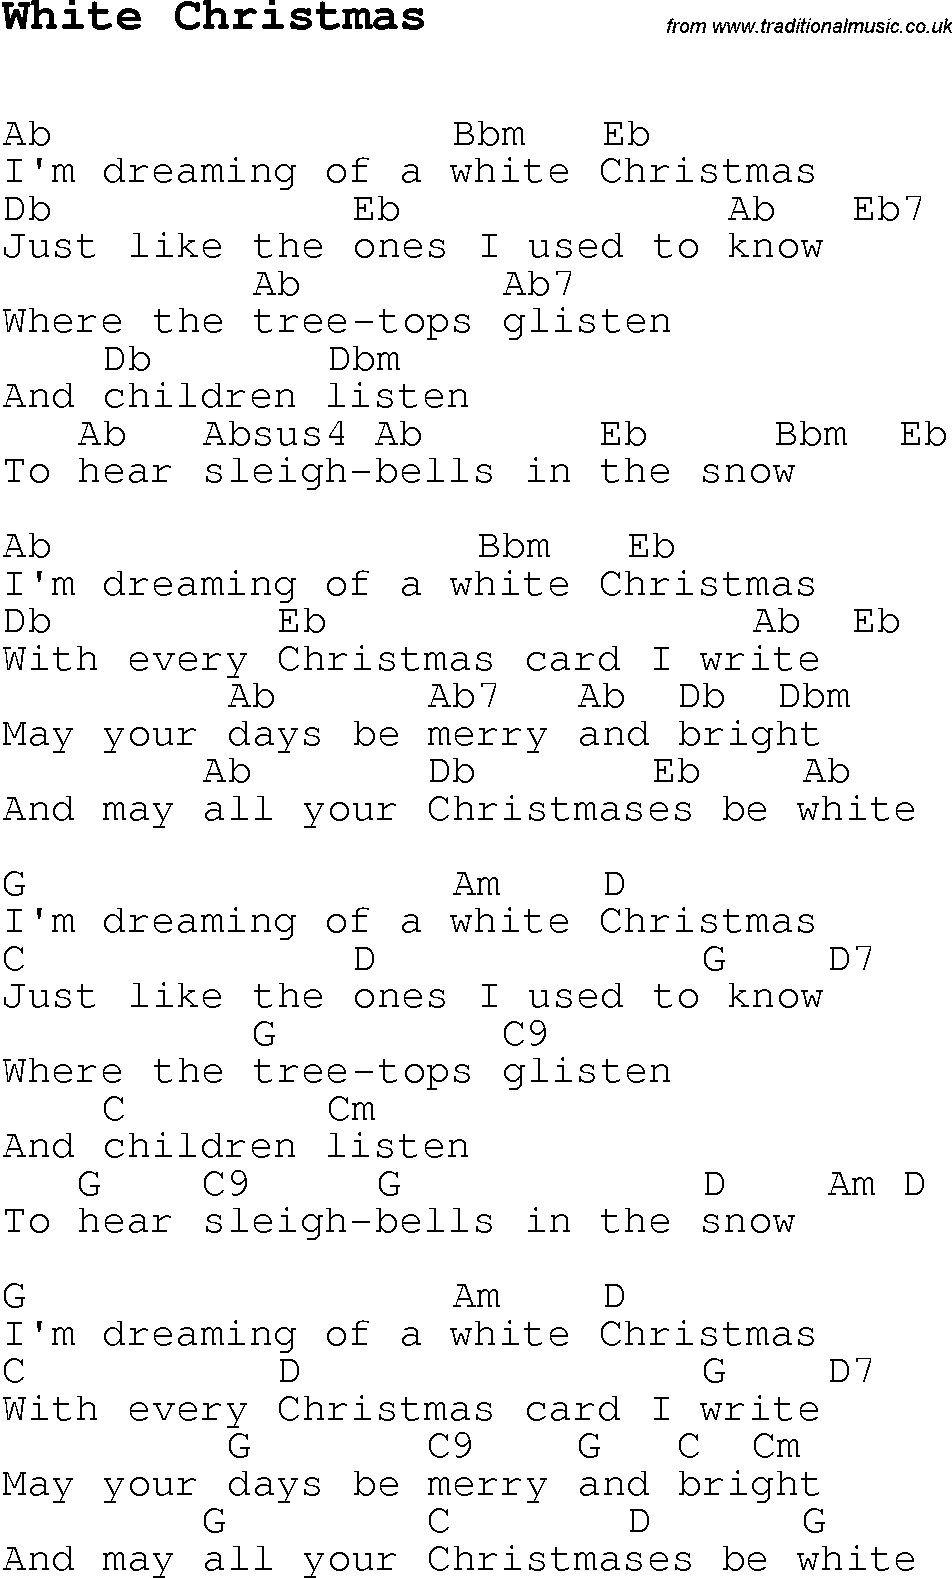 Christmas Songs and Carols, lyrics with chords for guitar banjo for White Christmas